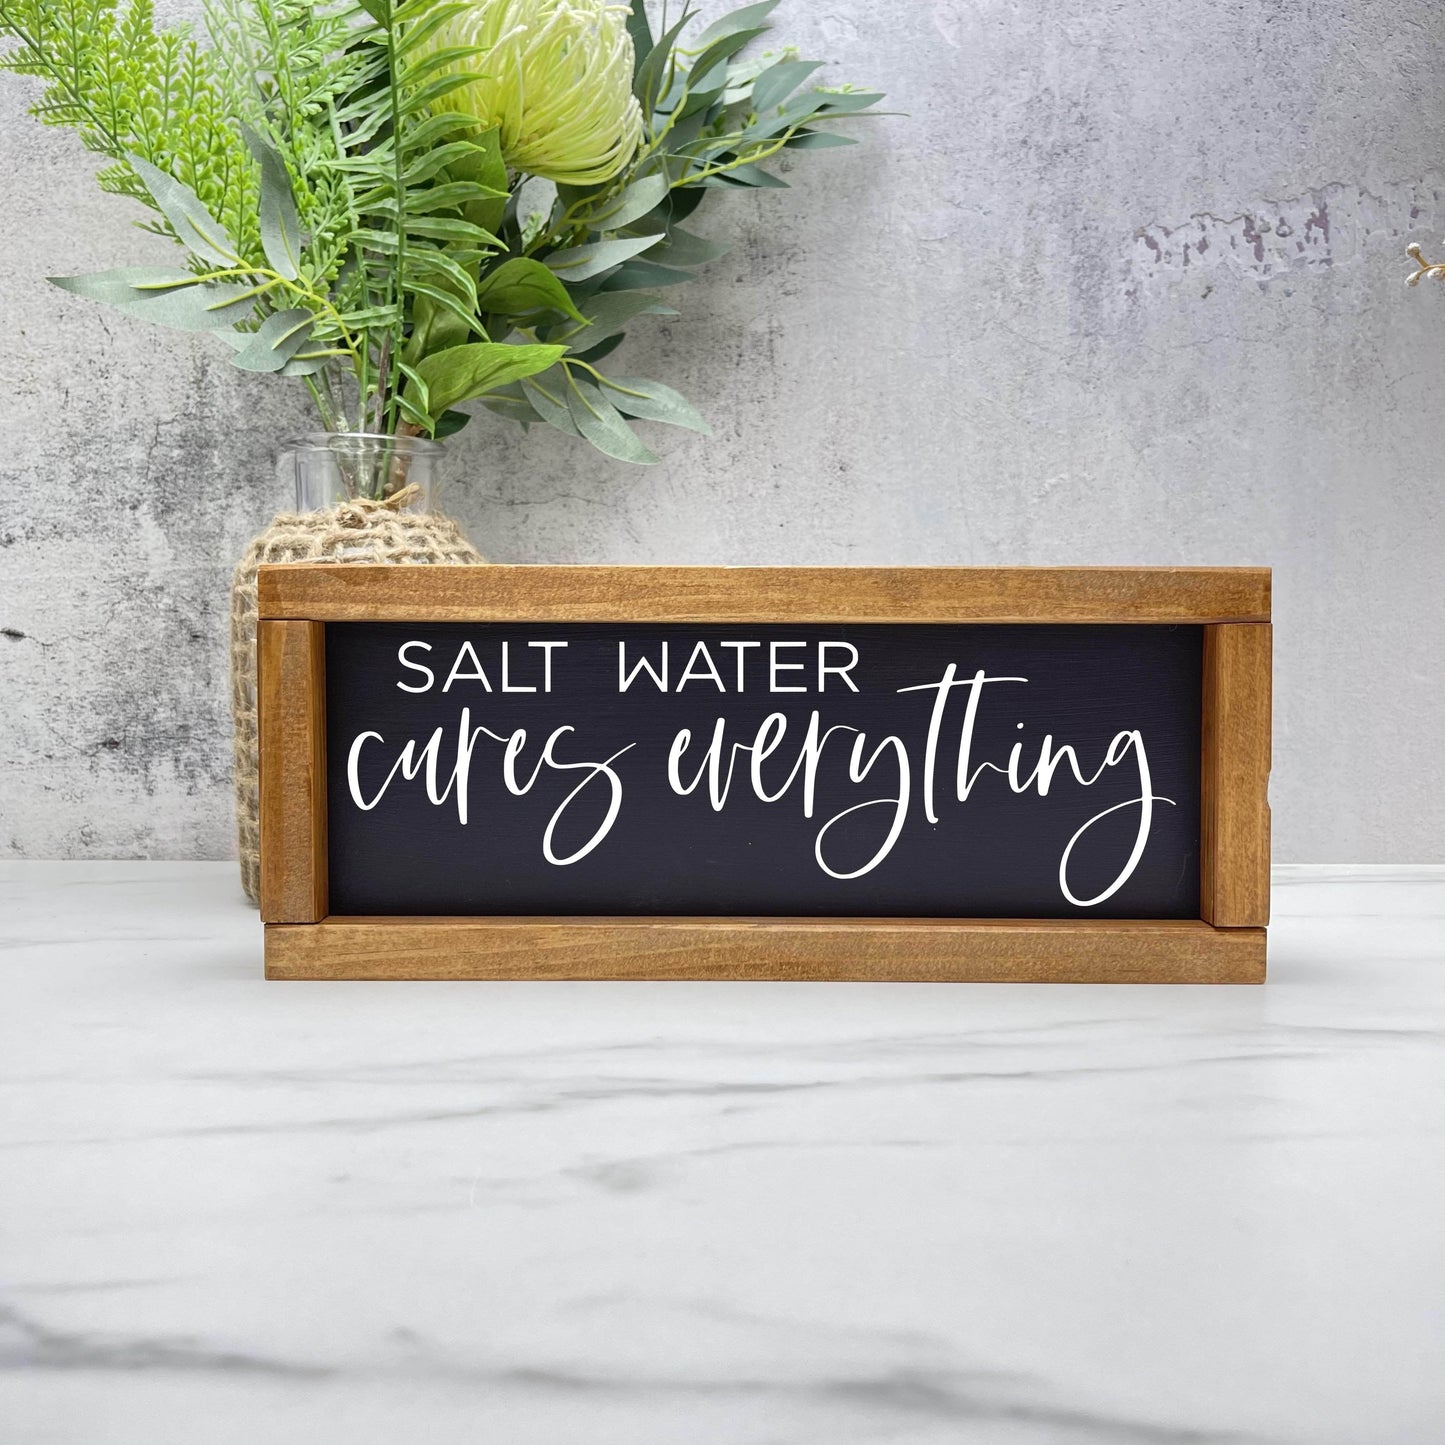 Salt water cures everything framed wood sign, farmhouse sign, rustic decor, home decor